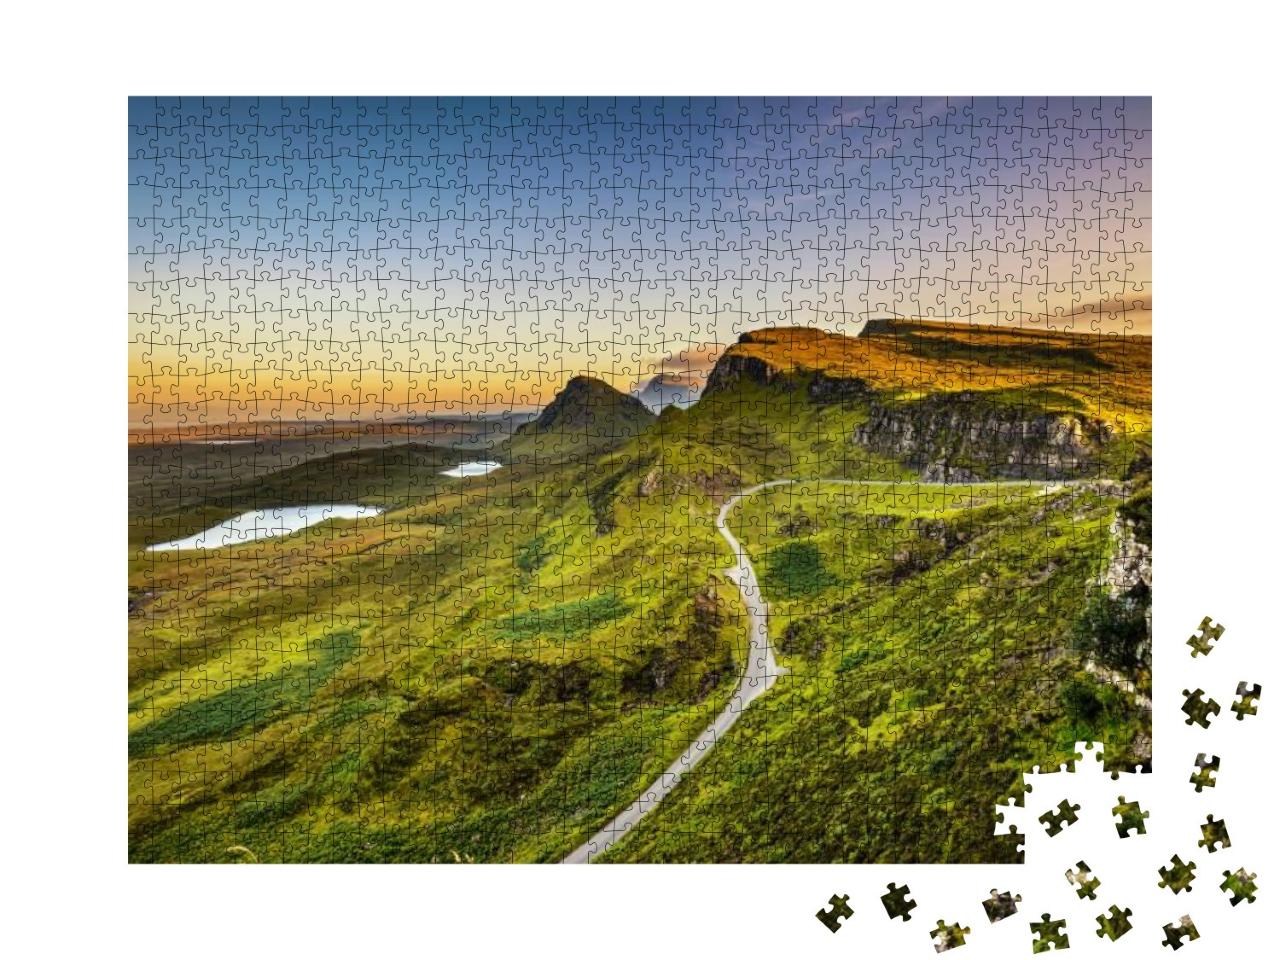 Quiraing Mountains Sunset At Isle of Skye, Scottish Highl... Jigsaw Puzzle with 1000 pieces